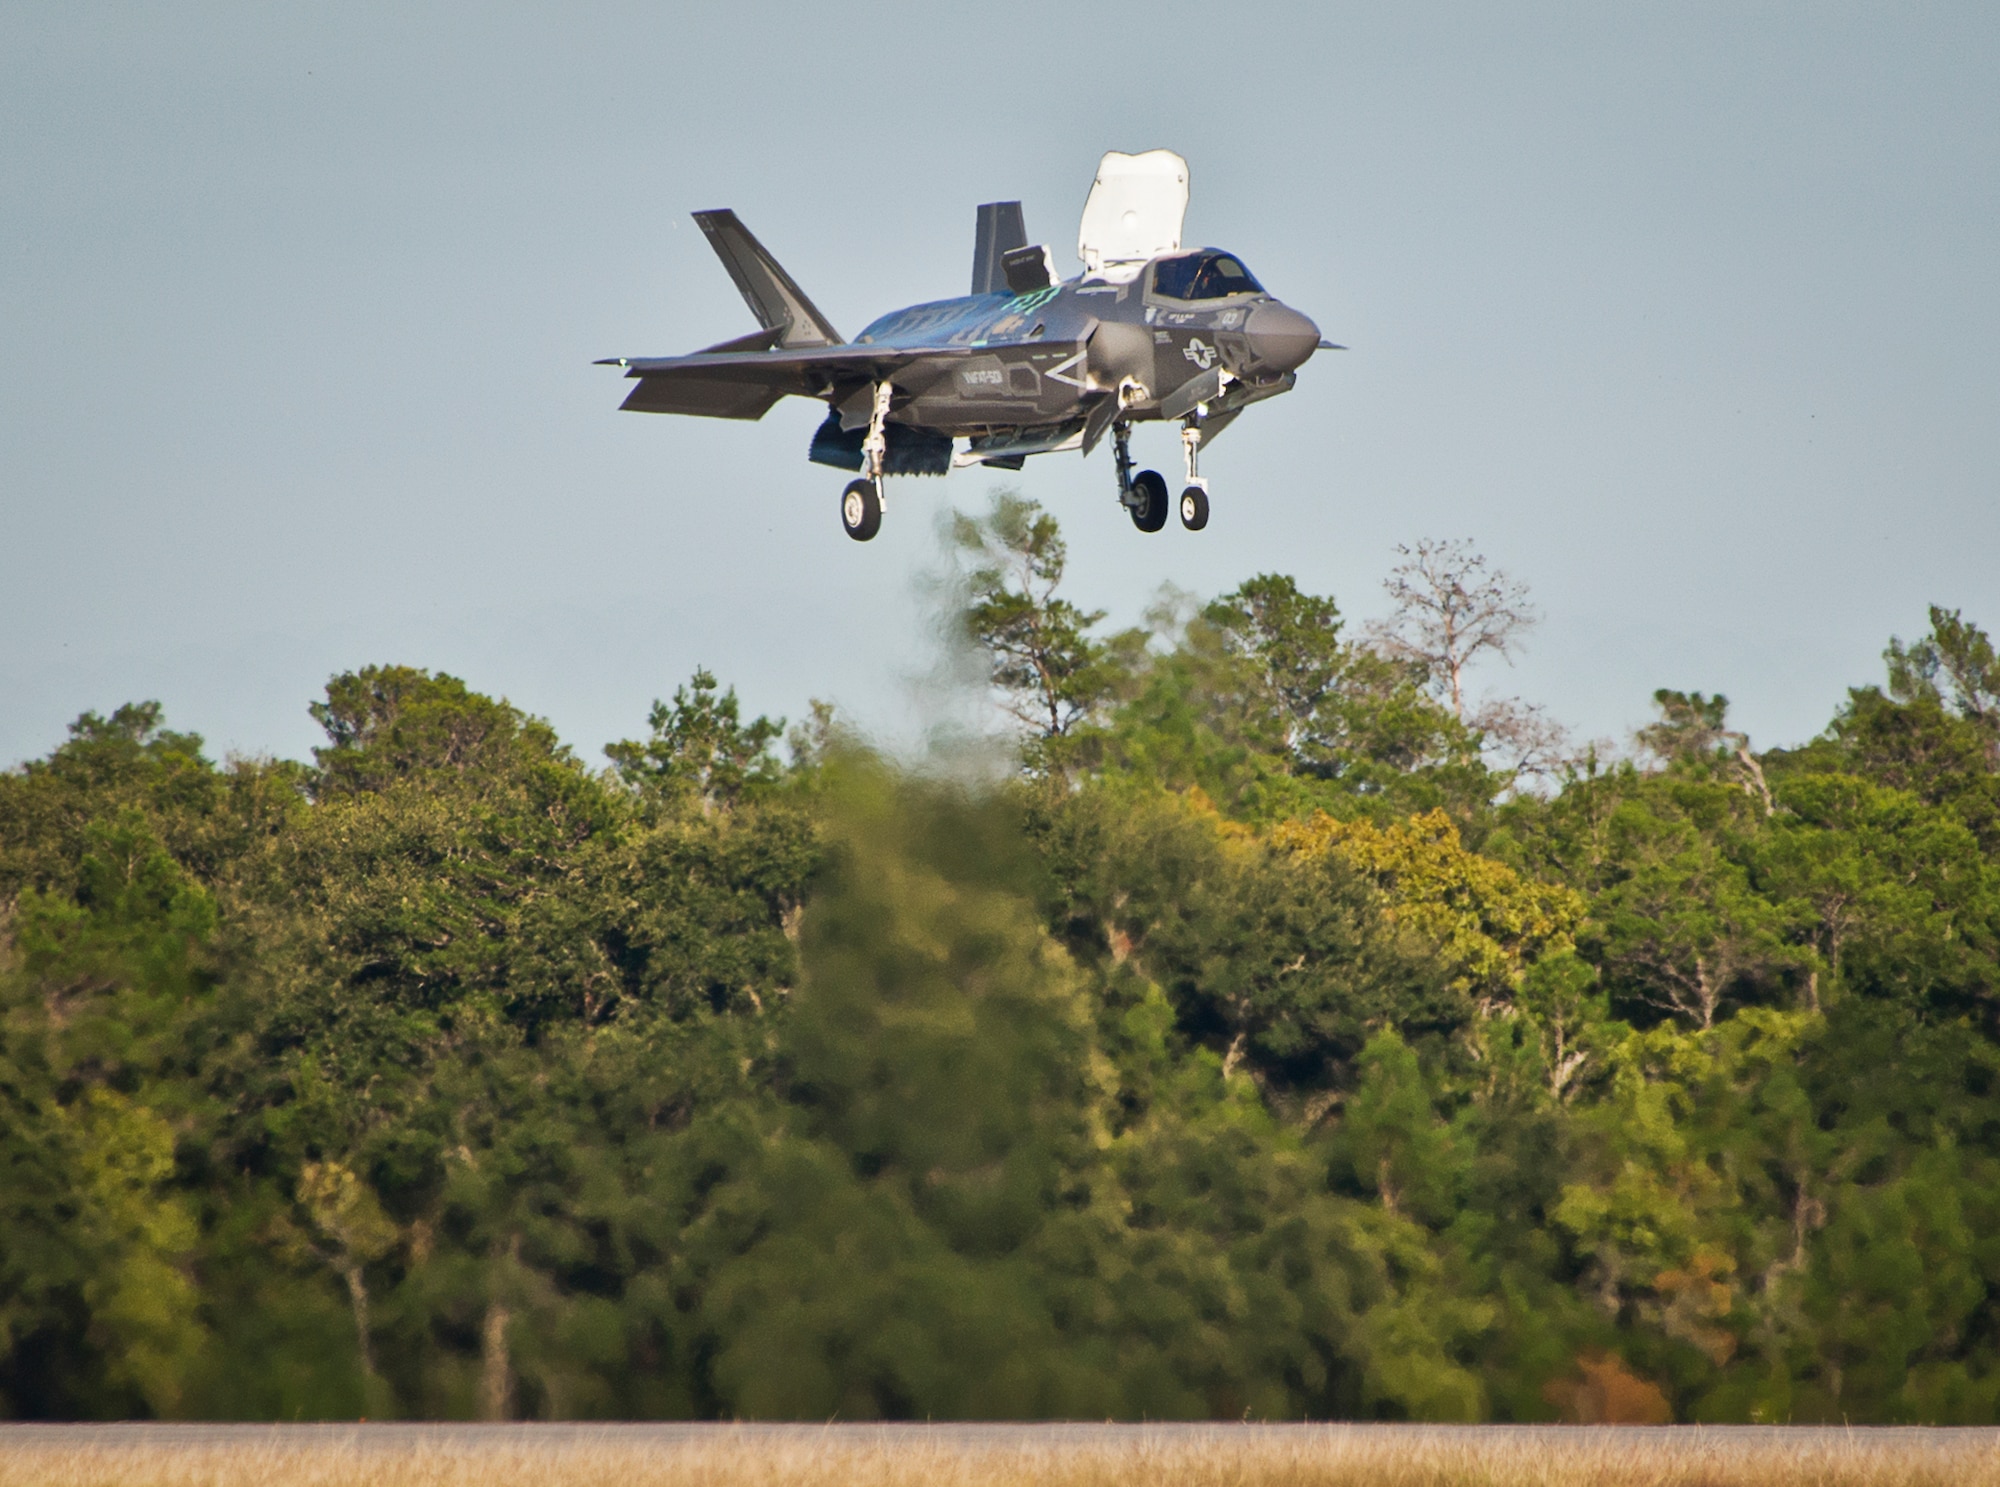 A Marine F-35B joint strike fighter hovers over the runway during the first short take-off and vertical landing mission at Eglin Air Force Base, Fla., Oct. 25. The milestone training mission was flown by Maj. Brendan M. Walsh, of the Marine Fighter Attack Training Squadron-501.  Walsh recently qualified in vertical landing operations at Marine Corps Air Station Yuma, Ariz. in preparation for this mission.  (U.S. Air Force photo/Samuel King Jr.)